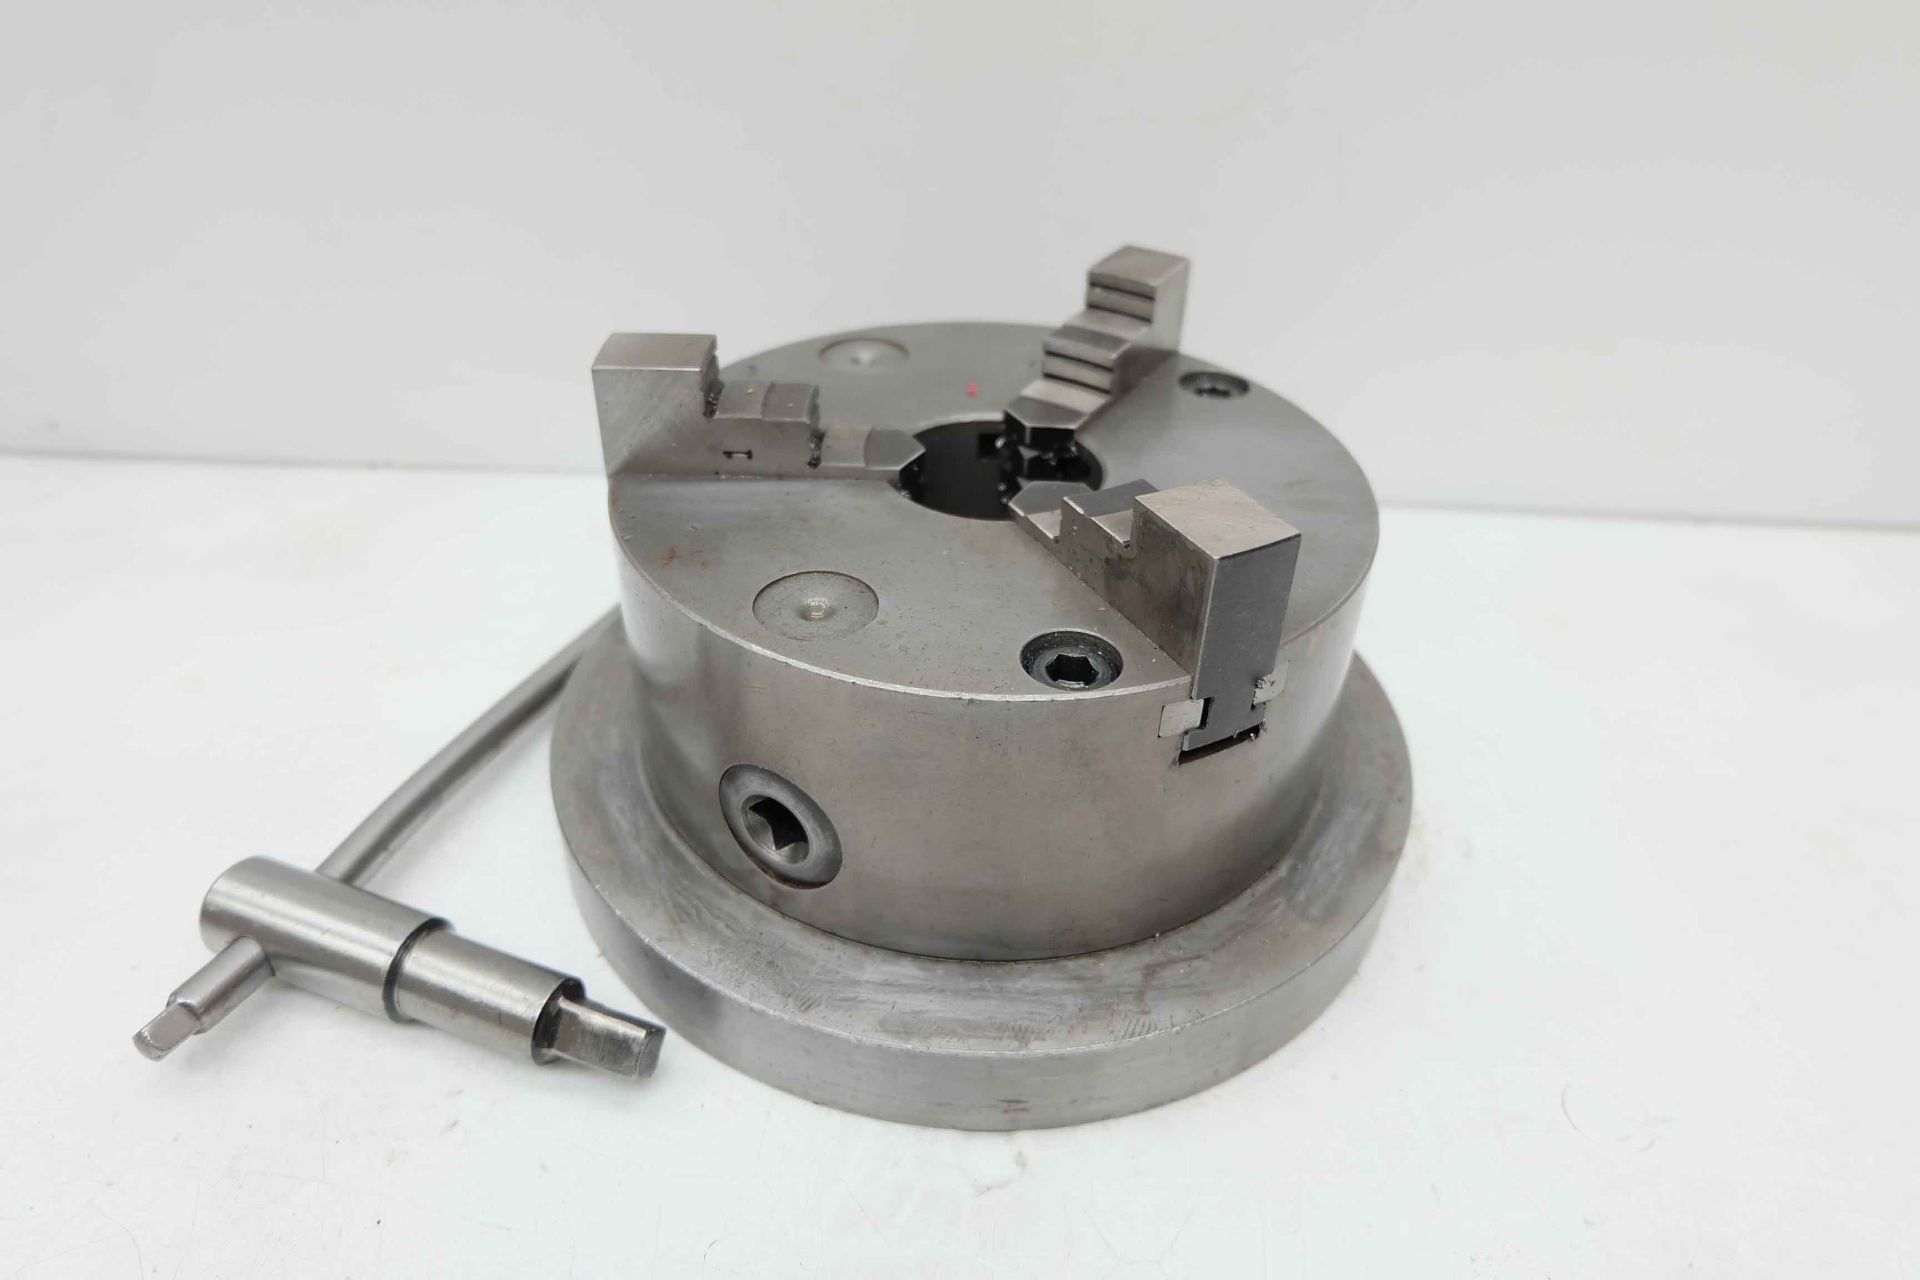 160mm Dia Three Jaw Chuck. Hole Through Chuck 46mm. Fixed To Base Plate For Magnetic or Clamping Dow